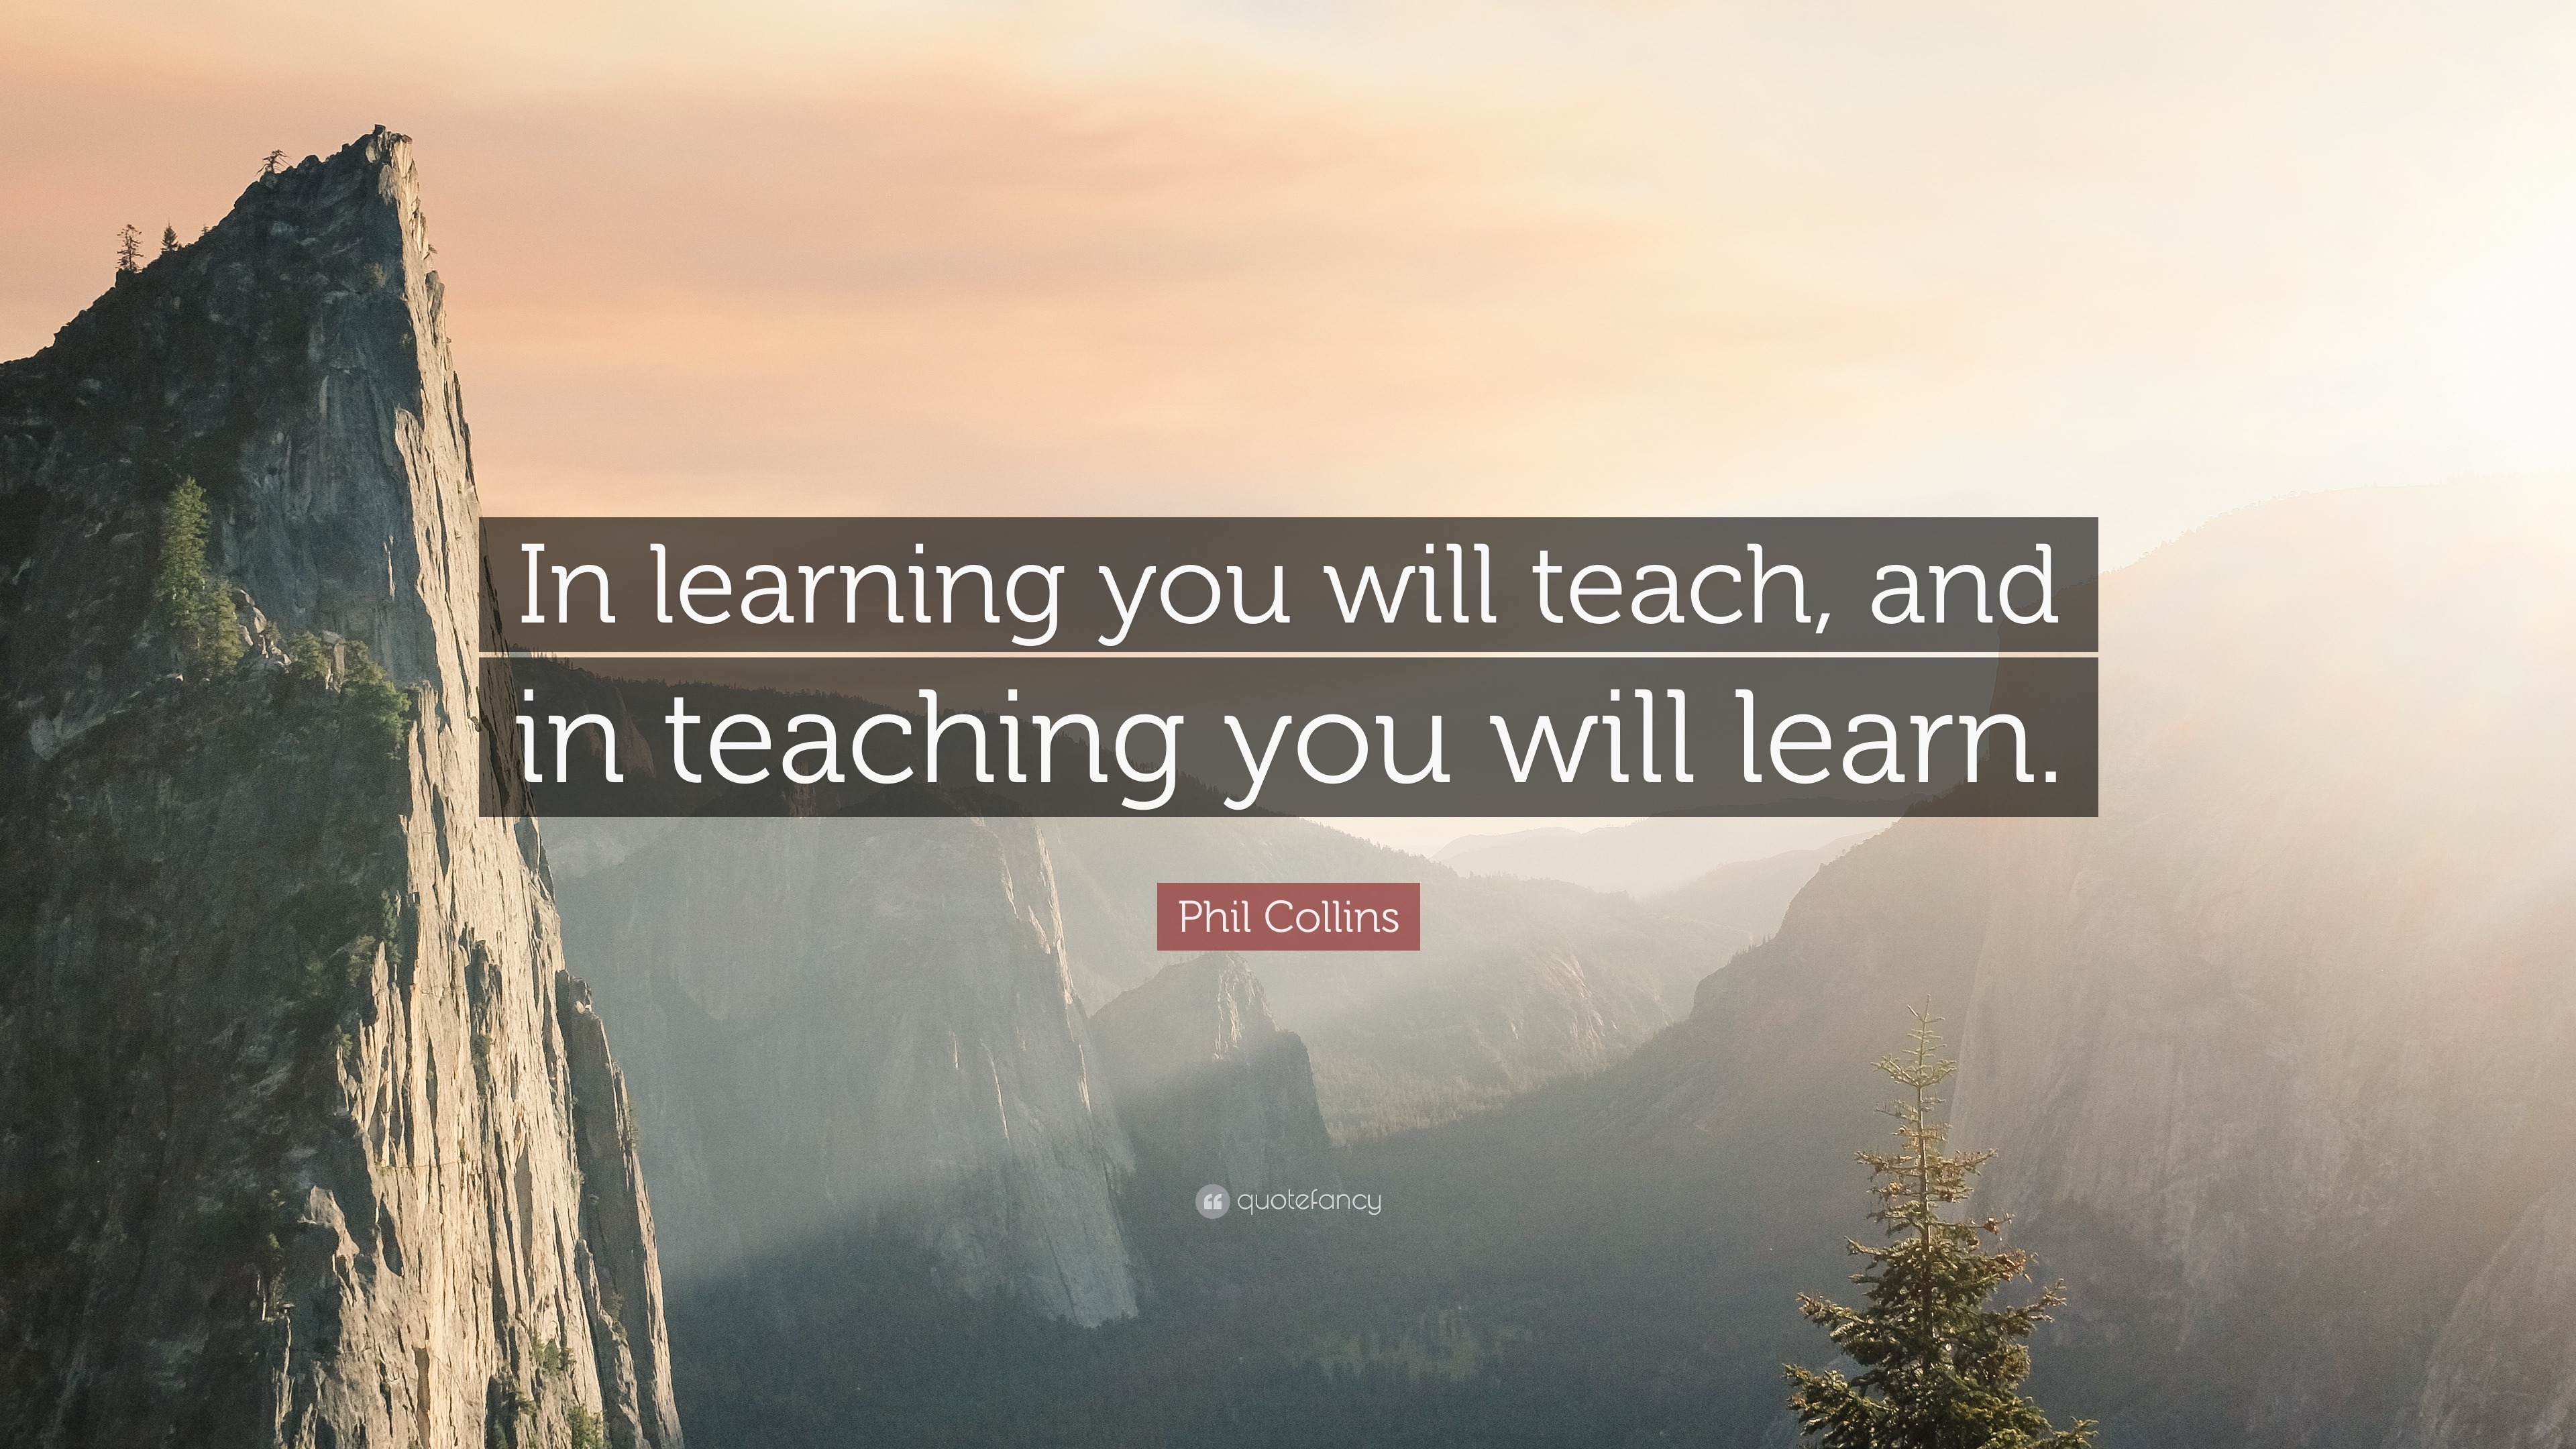 phil-collins-quote-in-learning-you-will-teach-and-in-teaching-you